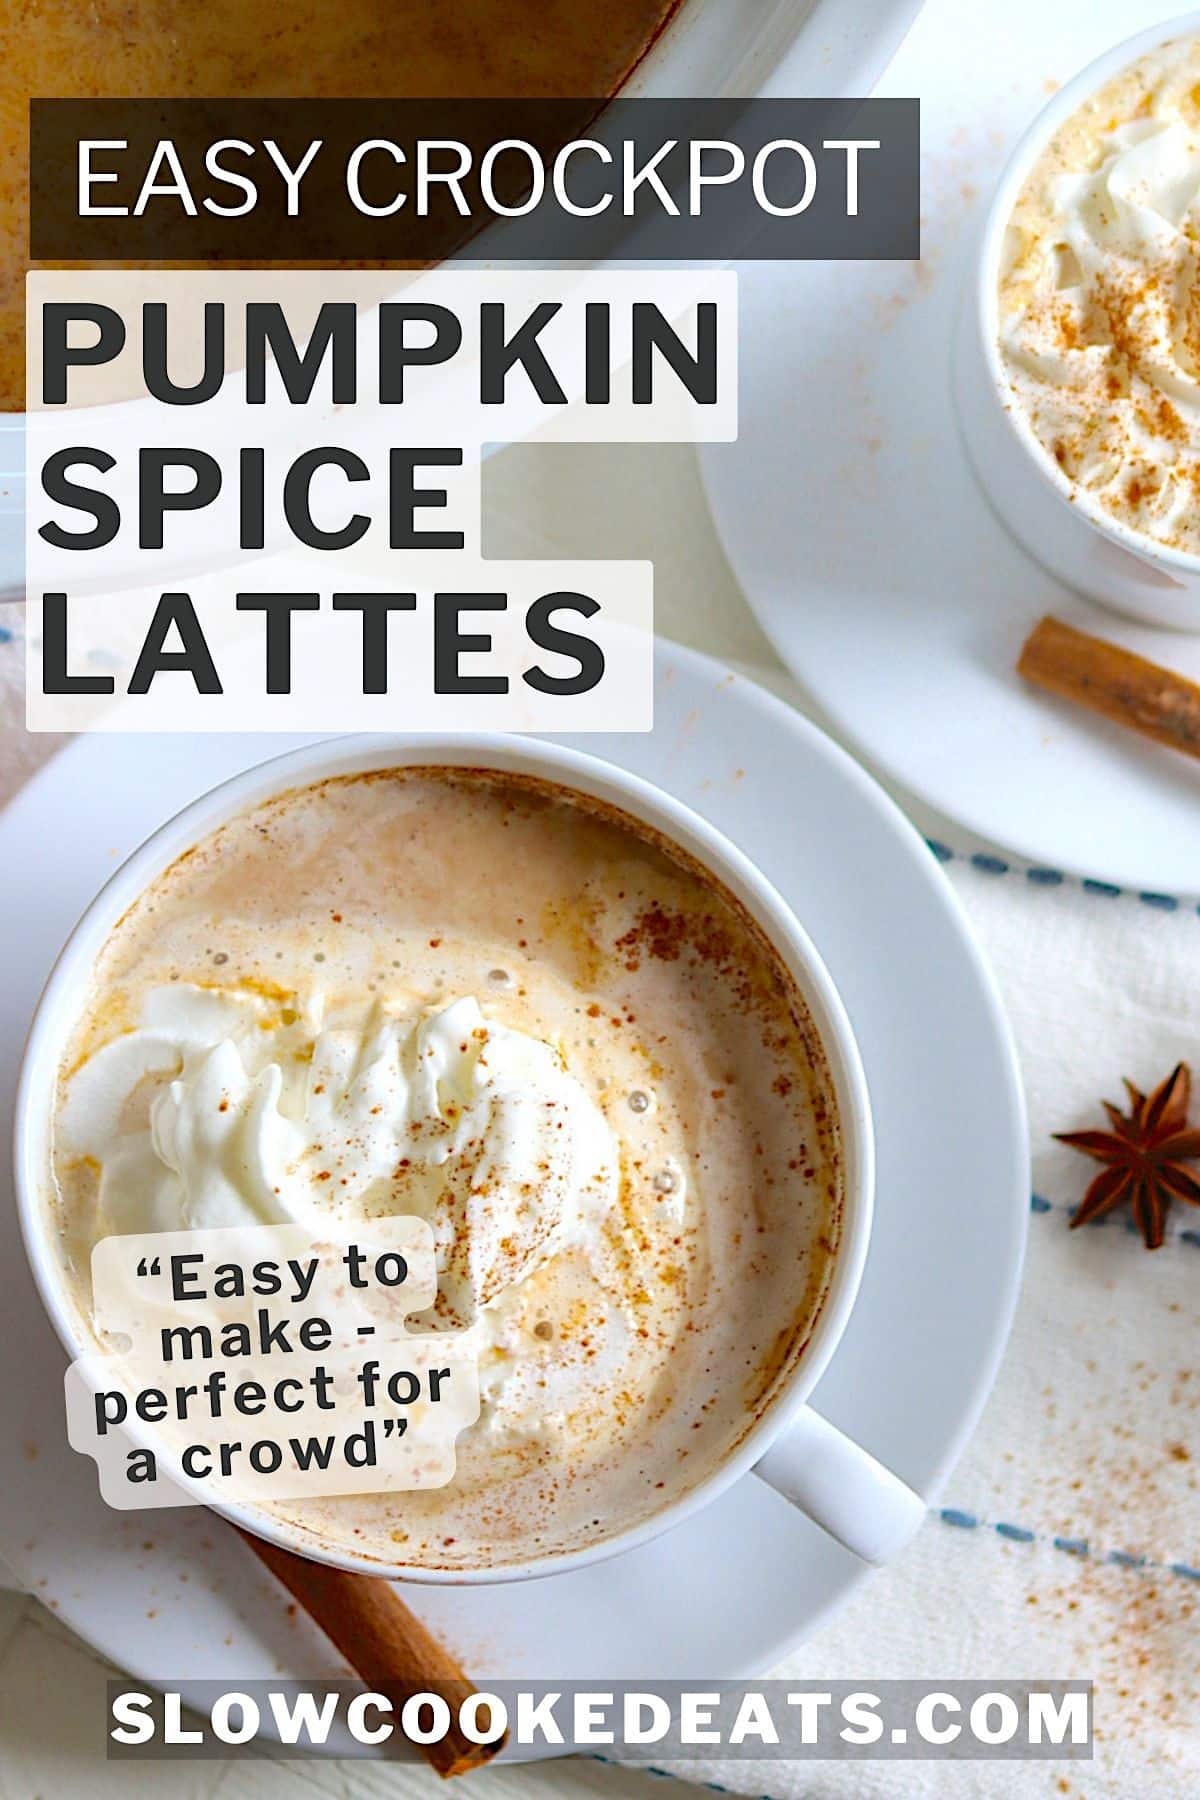 Pinterest pin with a pumpkin spice latte in a white cup and saucer.